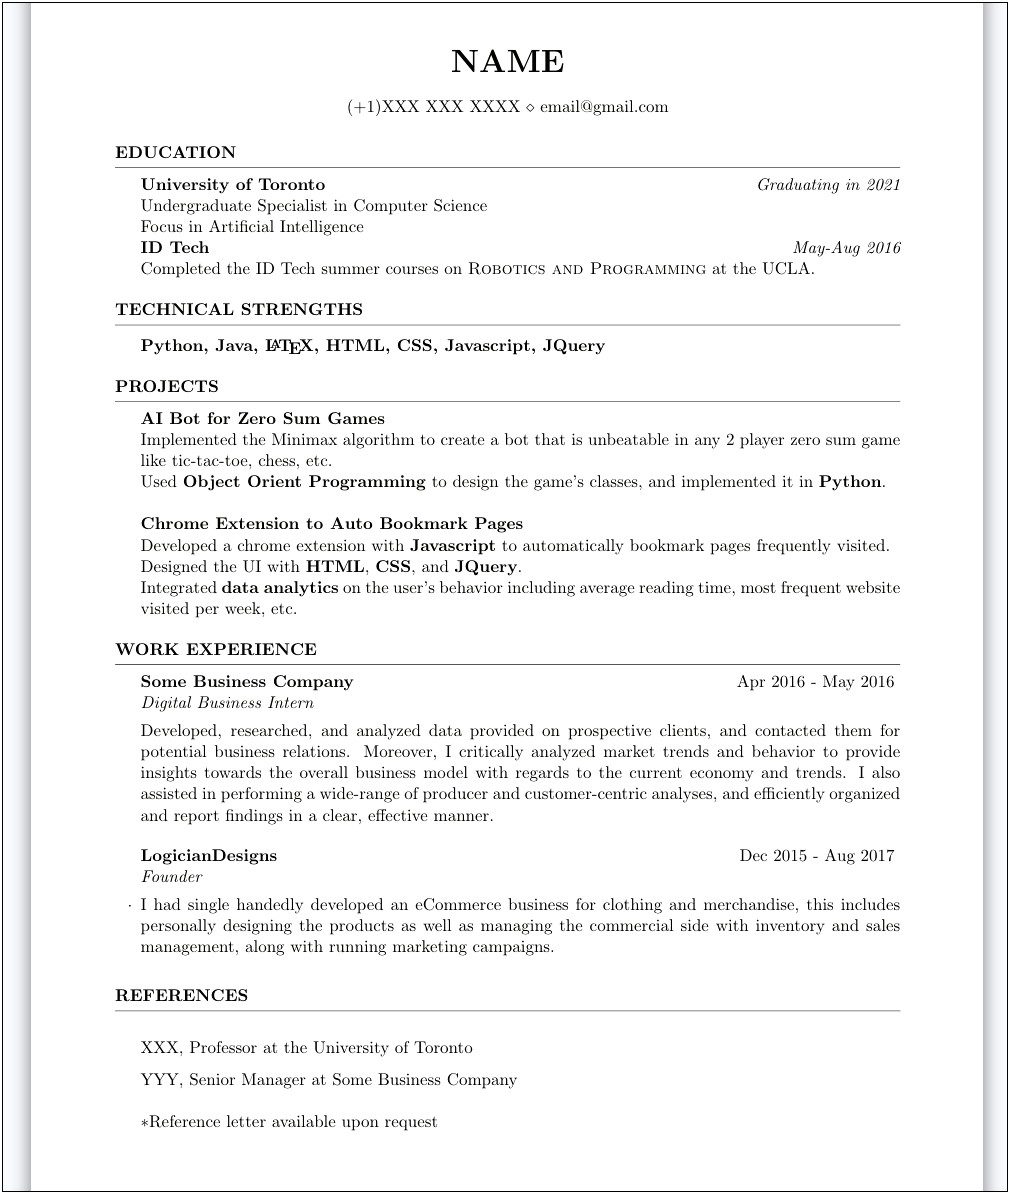 On Resume References Upon Request Good Or Bad